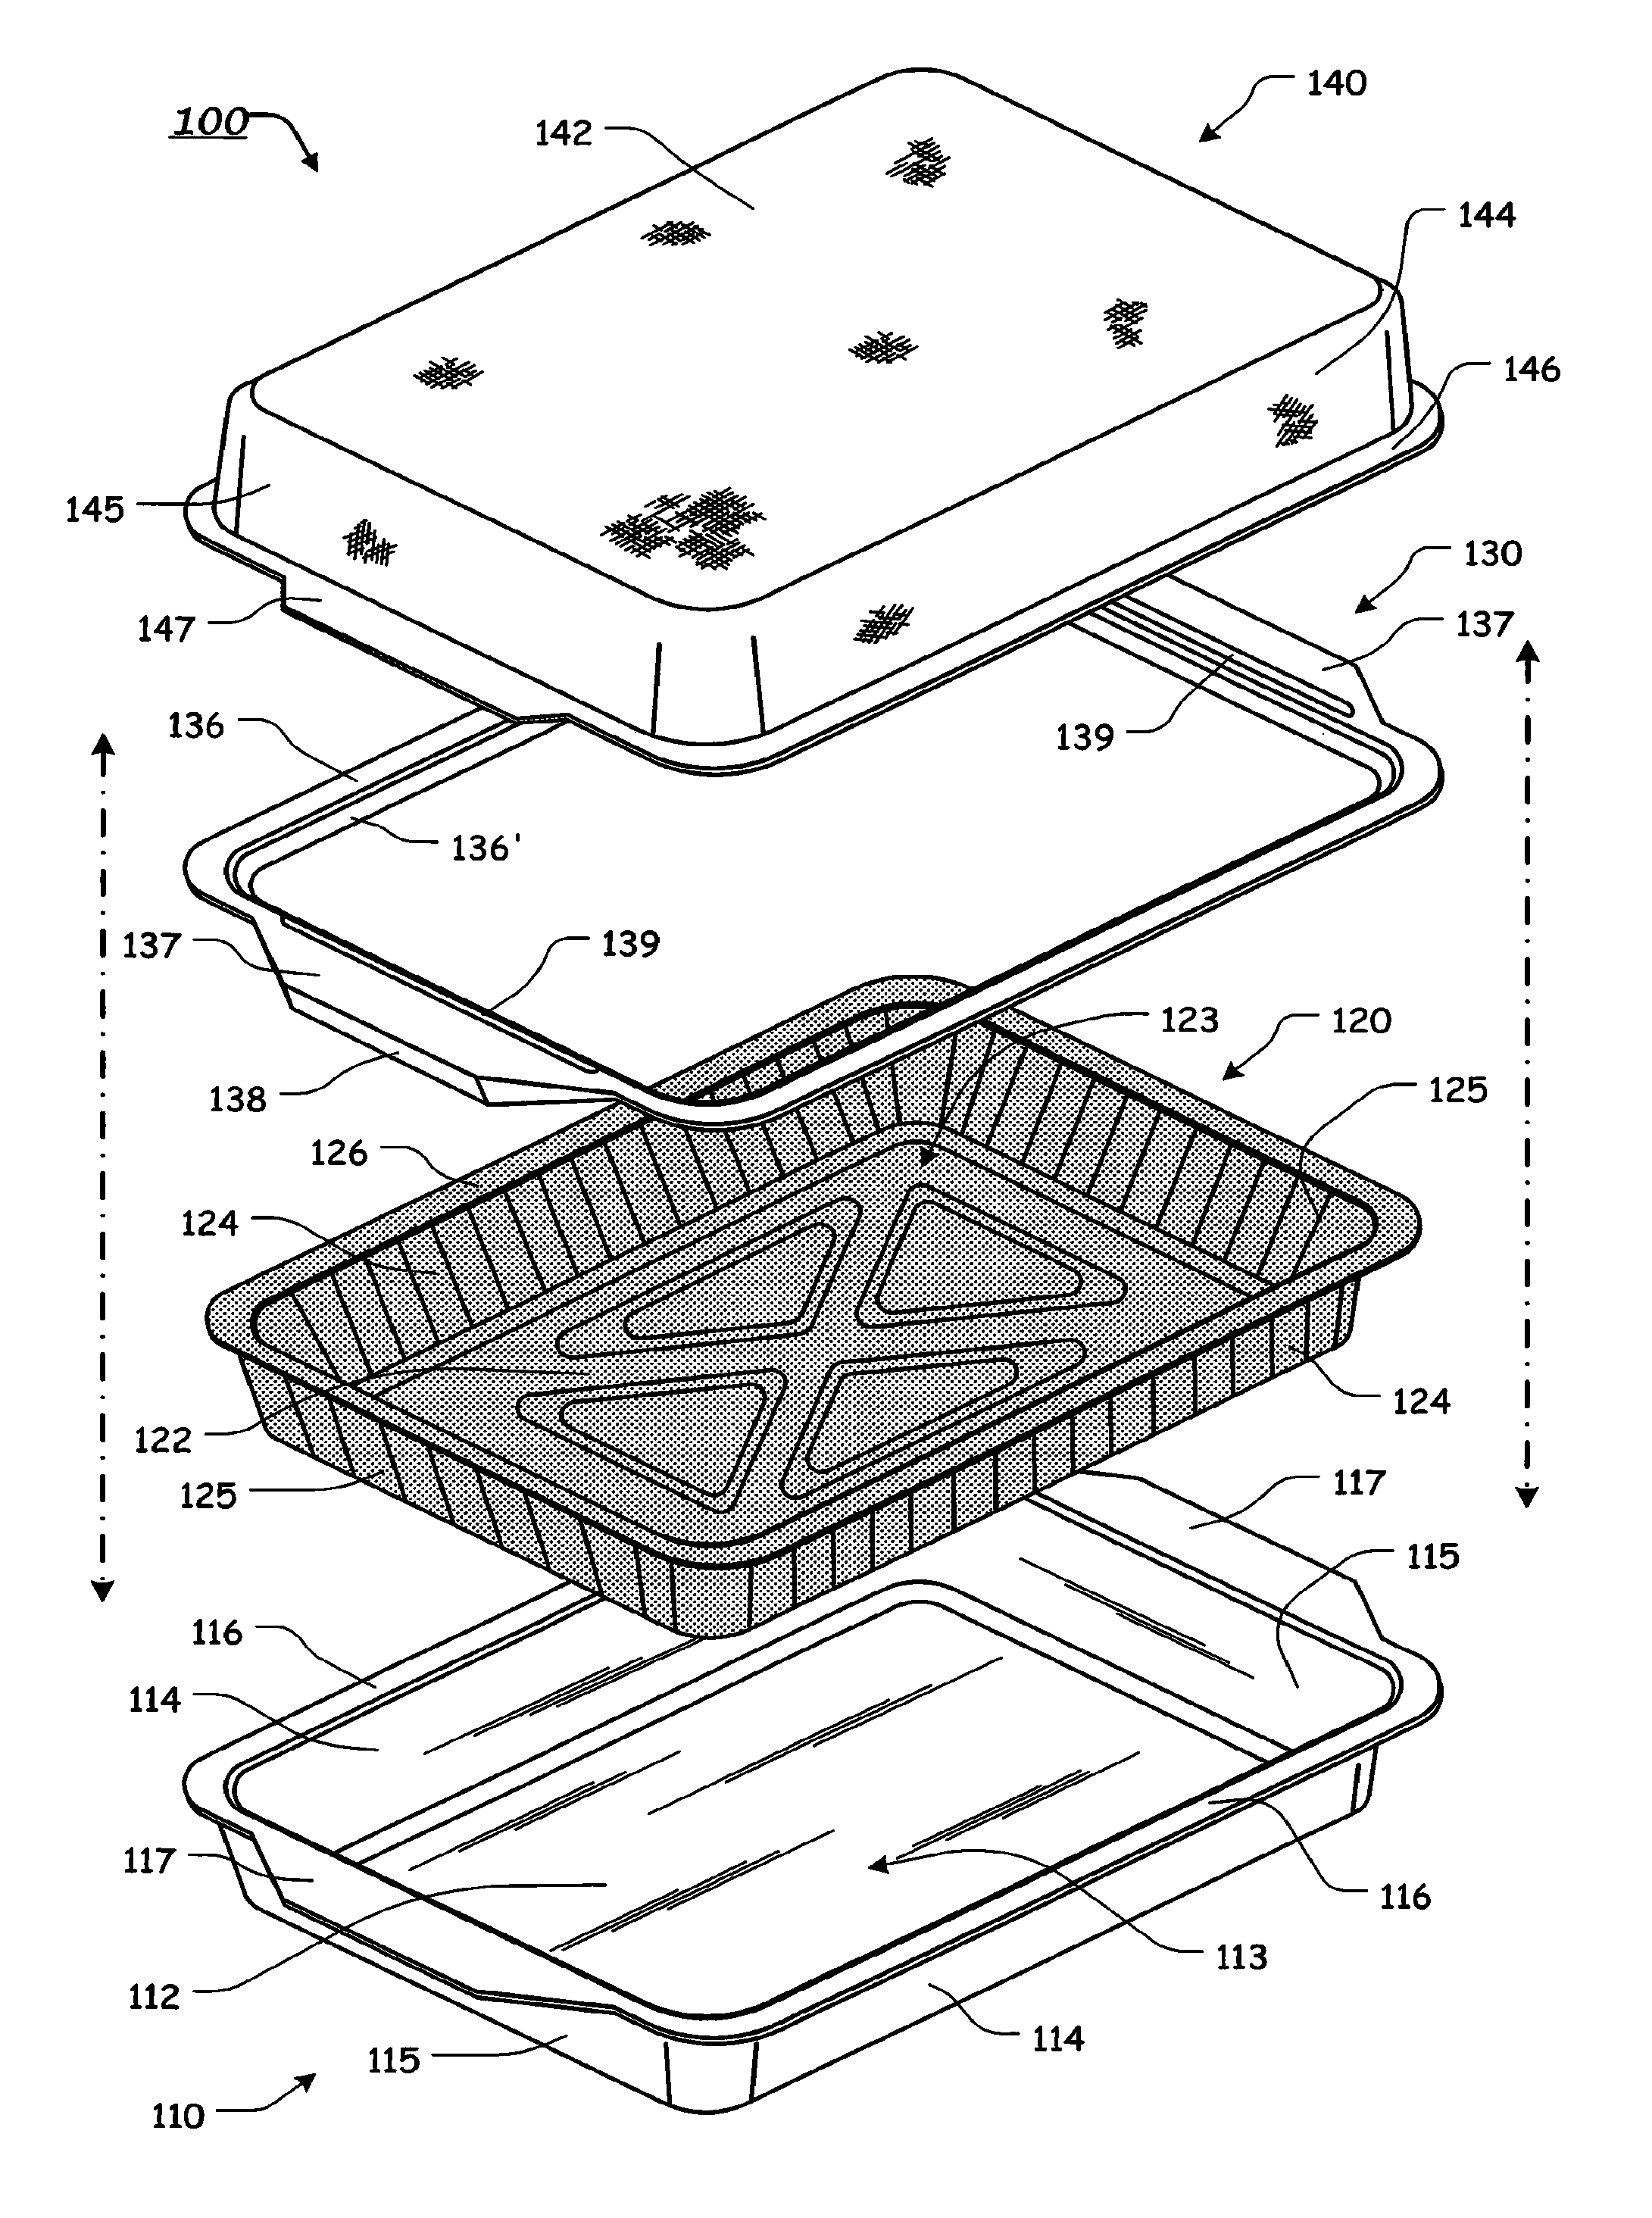 Decorative serving container system